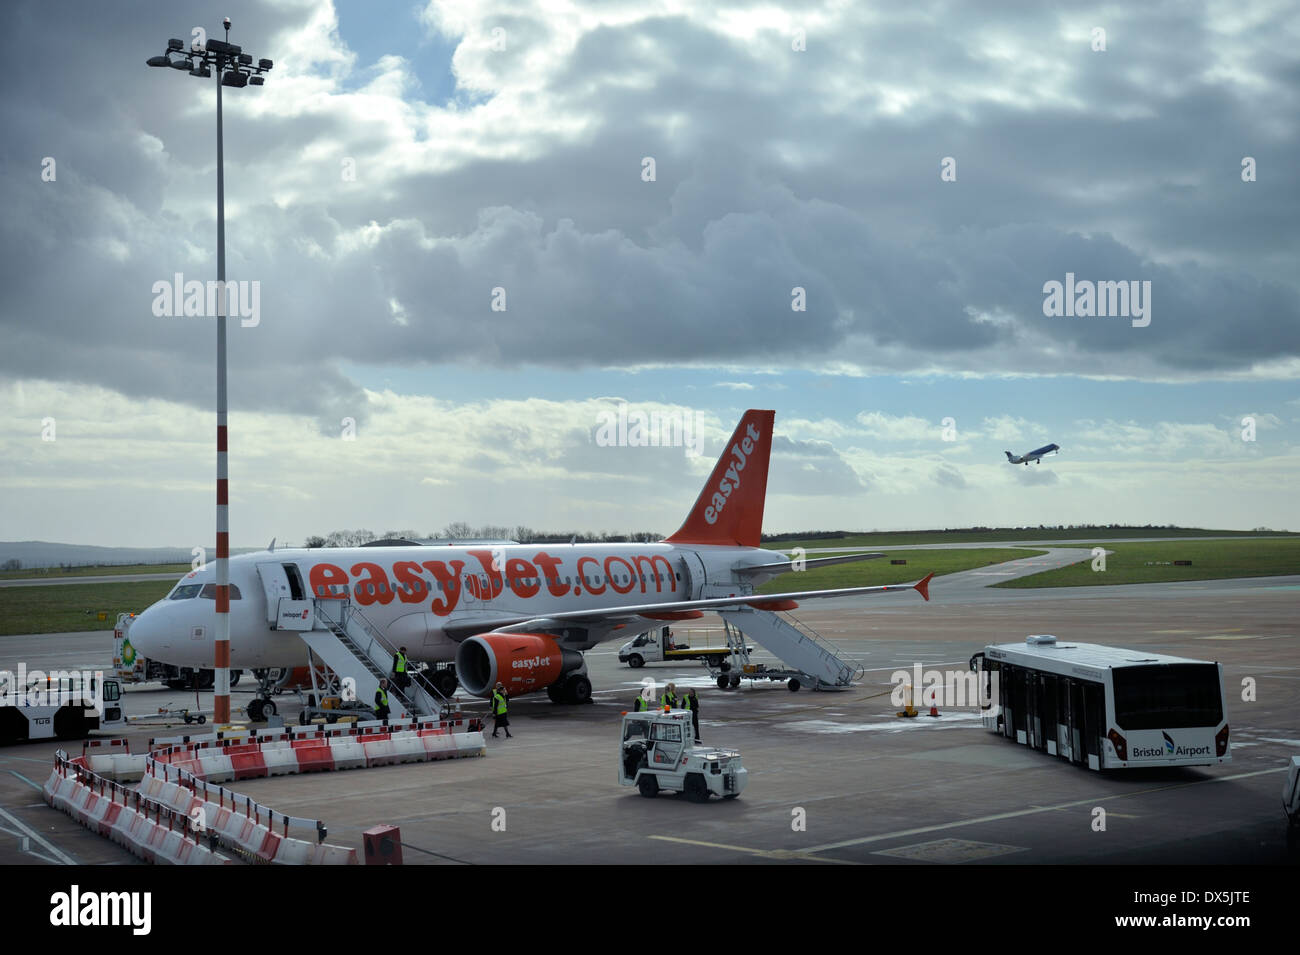 EasyJet plane being serviced before passenger boarding at Bristol airport, UK Stock Photo